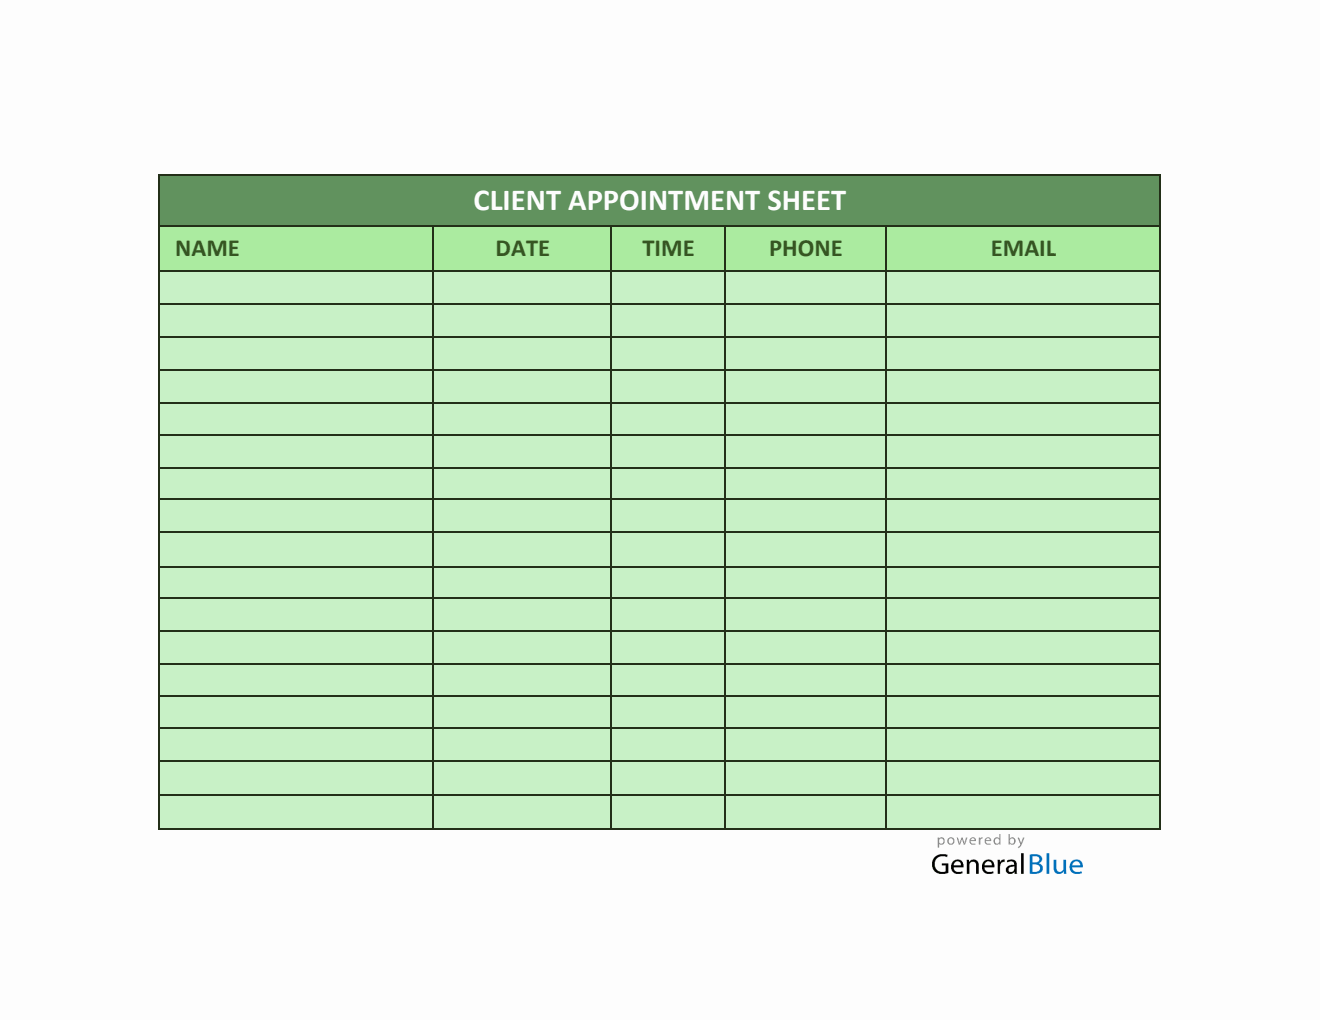 Client Appointment Sheet Template in Excel (Colorful)